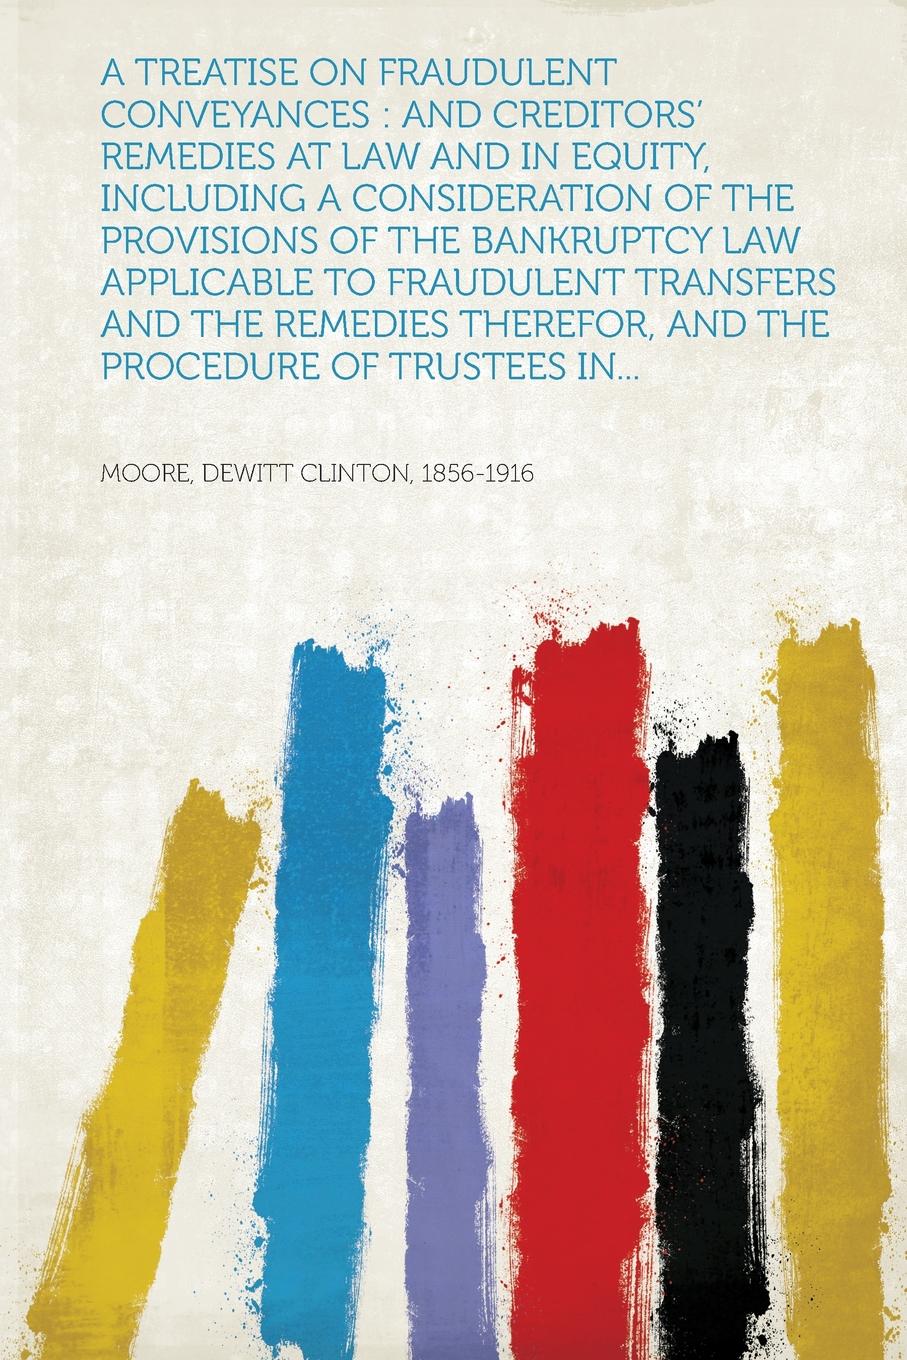 A Treatise on Fraudulent Conveyances. and Creditors. Remedies at Law and in Equity, Including a Consideration of the Provisions of the Bankruptcy Law Applicable to Fraudulent Transfers and the Remedies Therefor, and the Procedure of Trustees in...